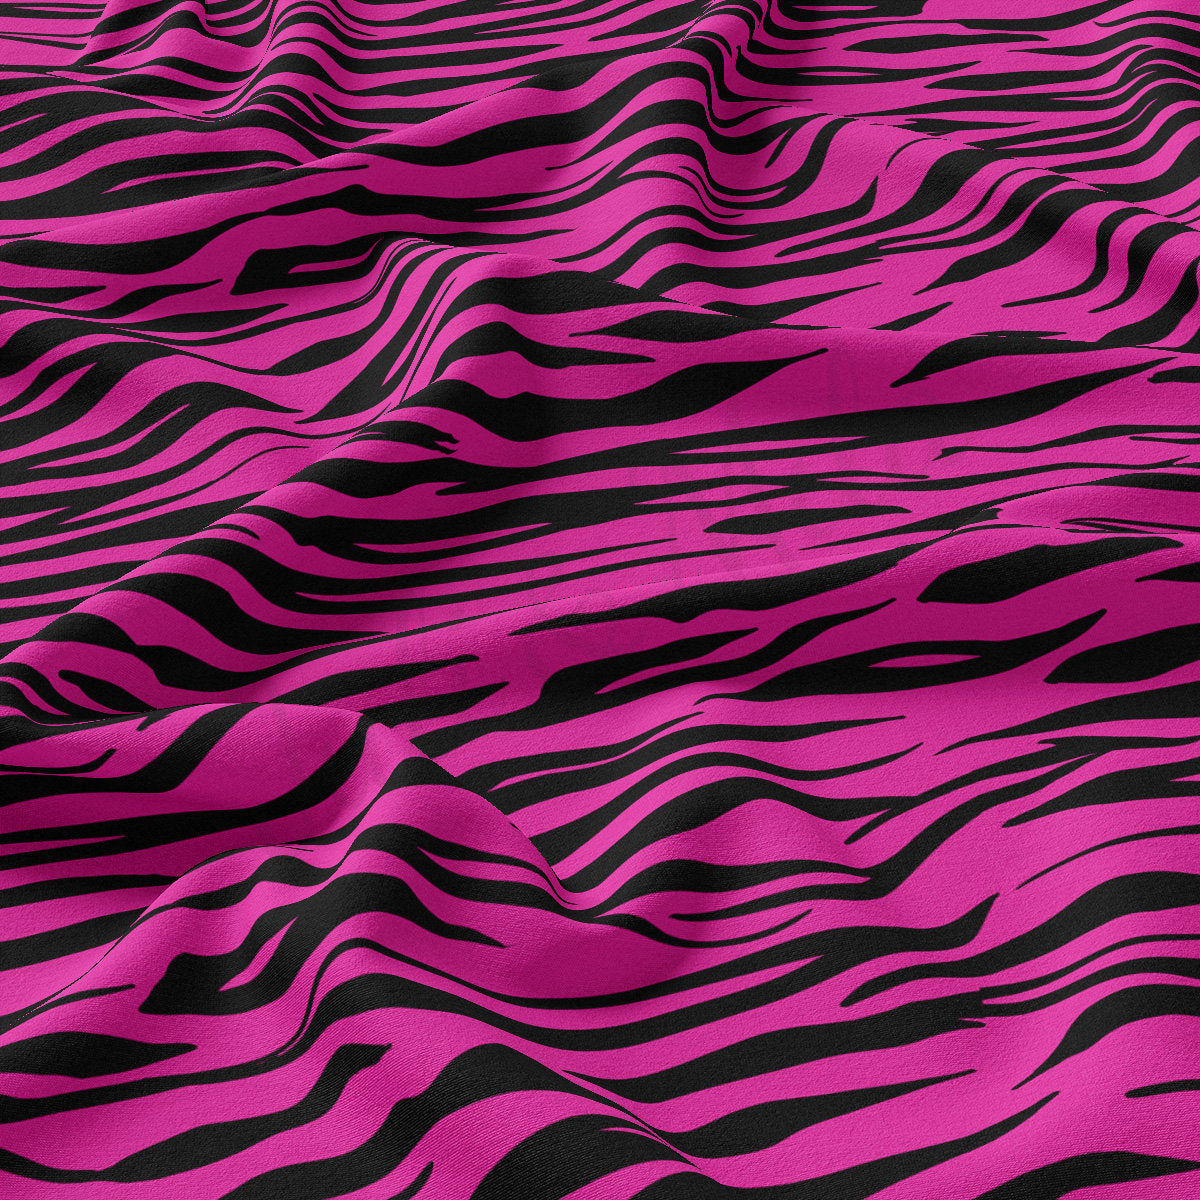 DBP Fabric Double Brushed Polyester DBP2723 Tiger